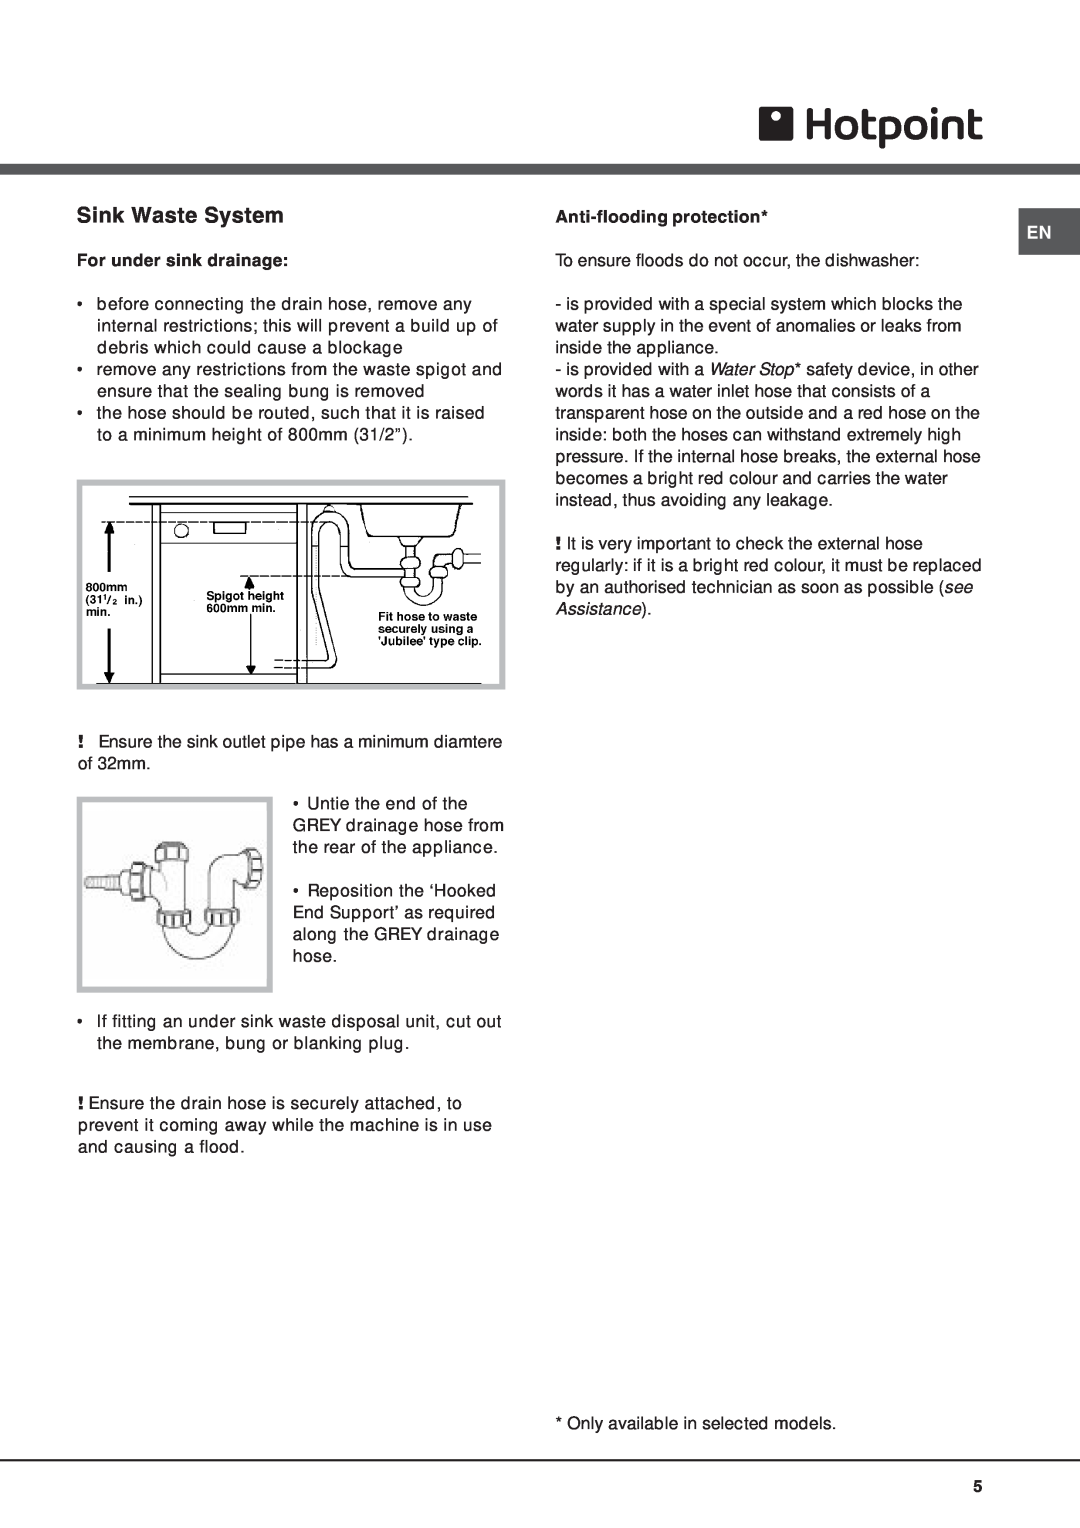 Hotpoint FDW 70, FDW 75 manual Sink Waste System, For under sink drainage, Anti-floodingprotection 